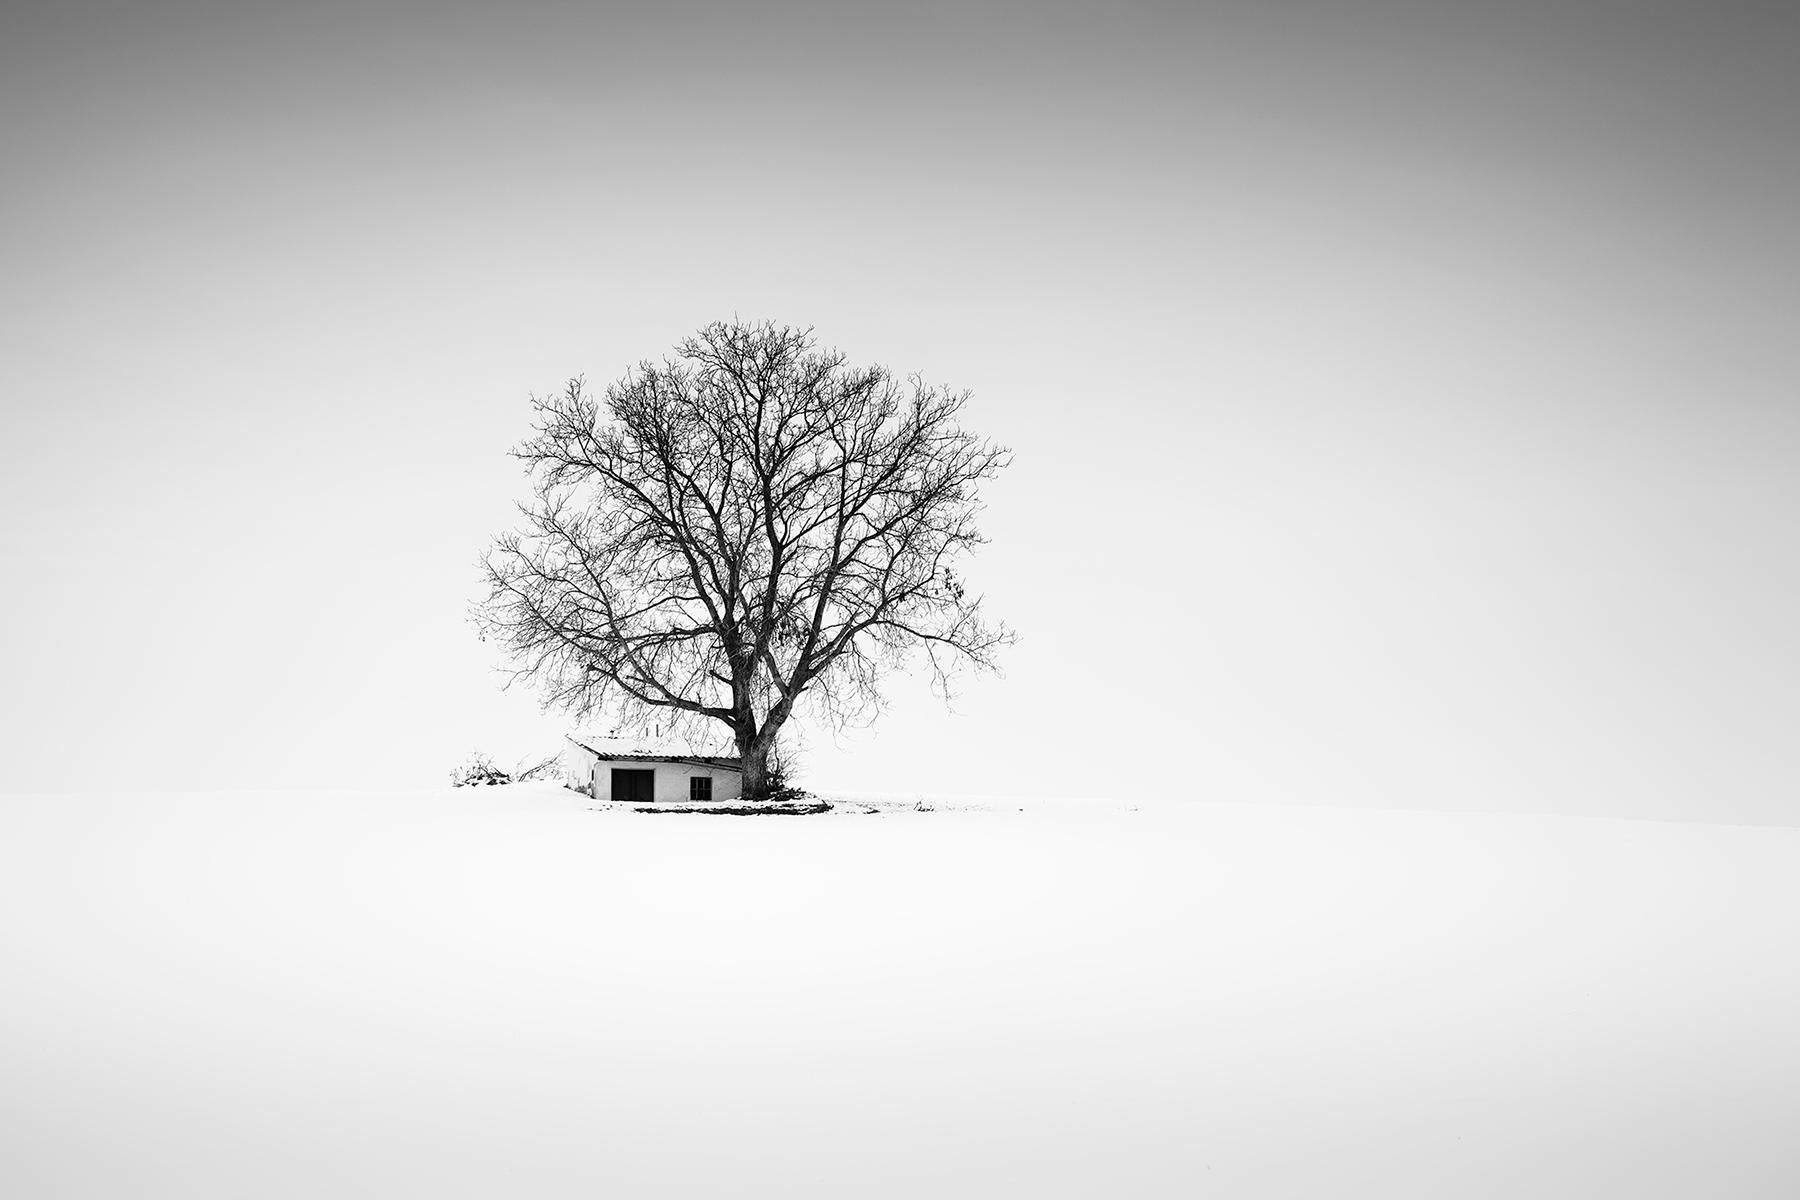 Press House, Winter, Austria, black and white photography, panorama, landscape